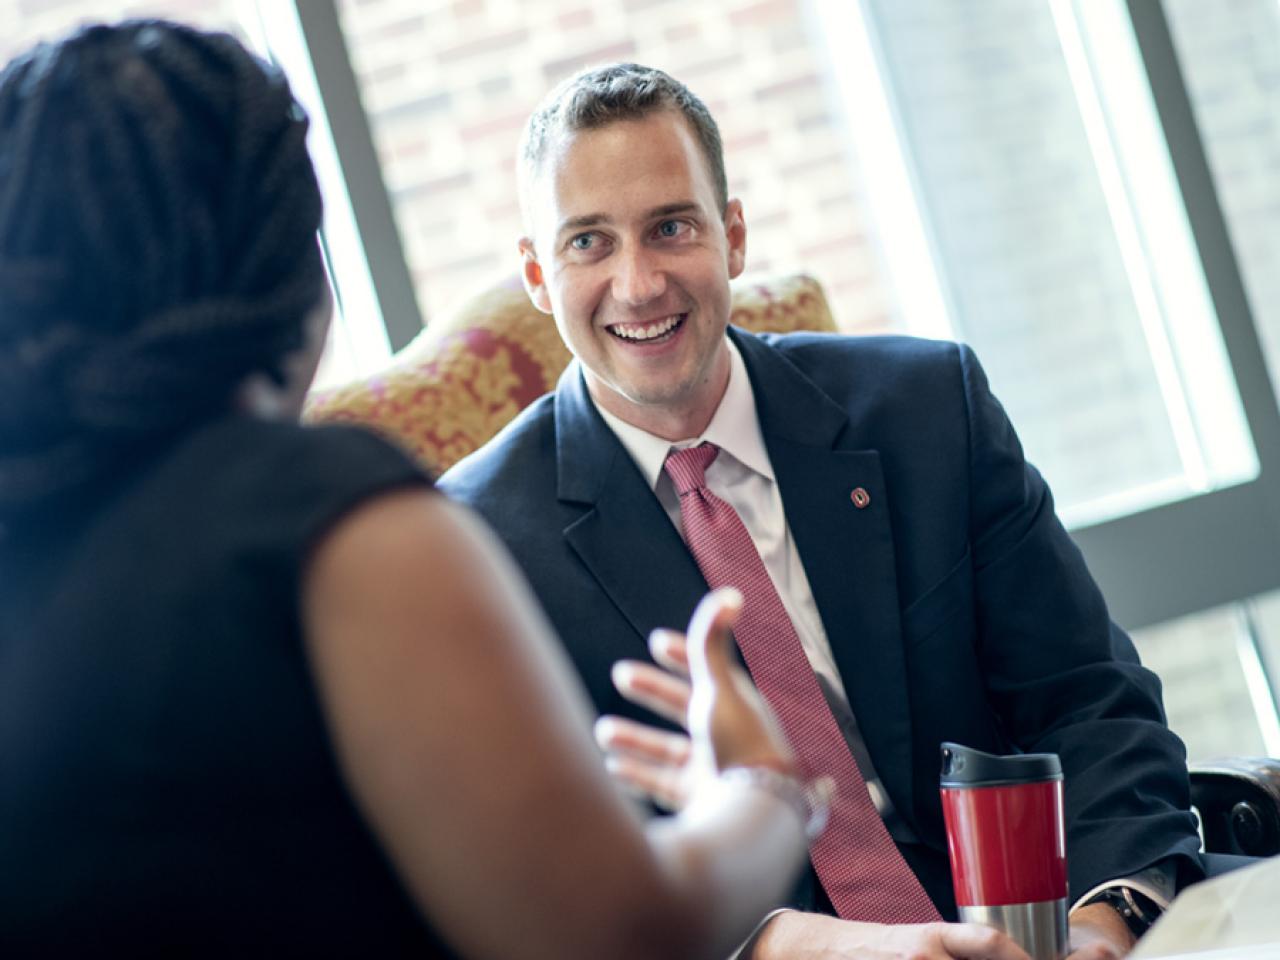 Ohio State University Advancement employees Ben Miller and Courtney Ross chat in the Ohio Union